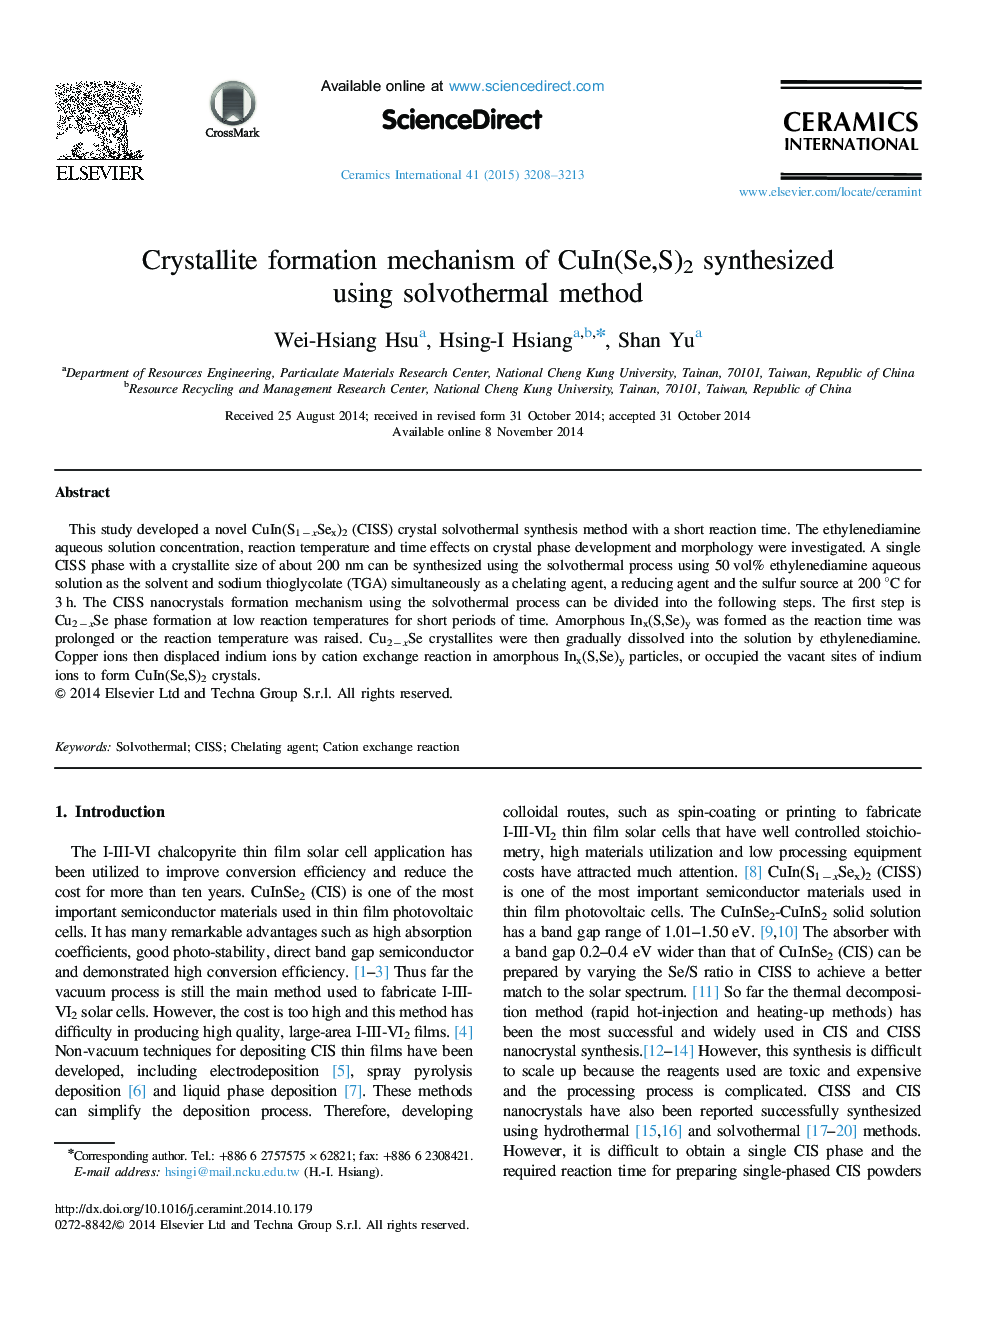 Crystallite formation mechanism of CuIn(Se,S)2 synthesized using solvothermal method